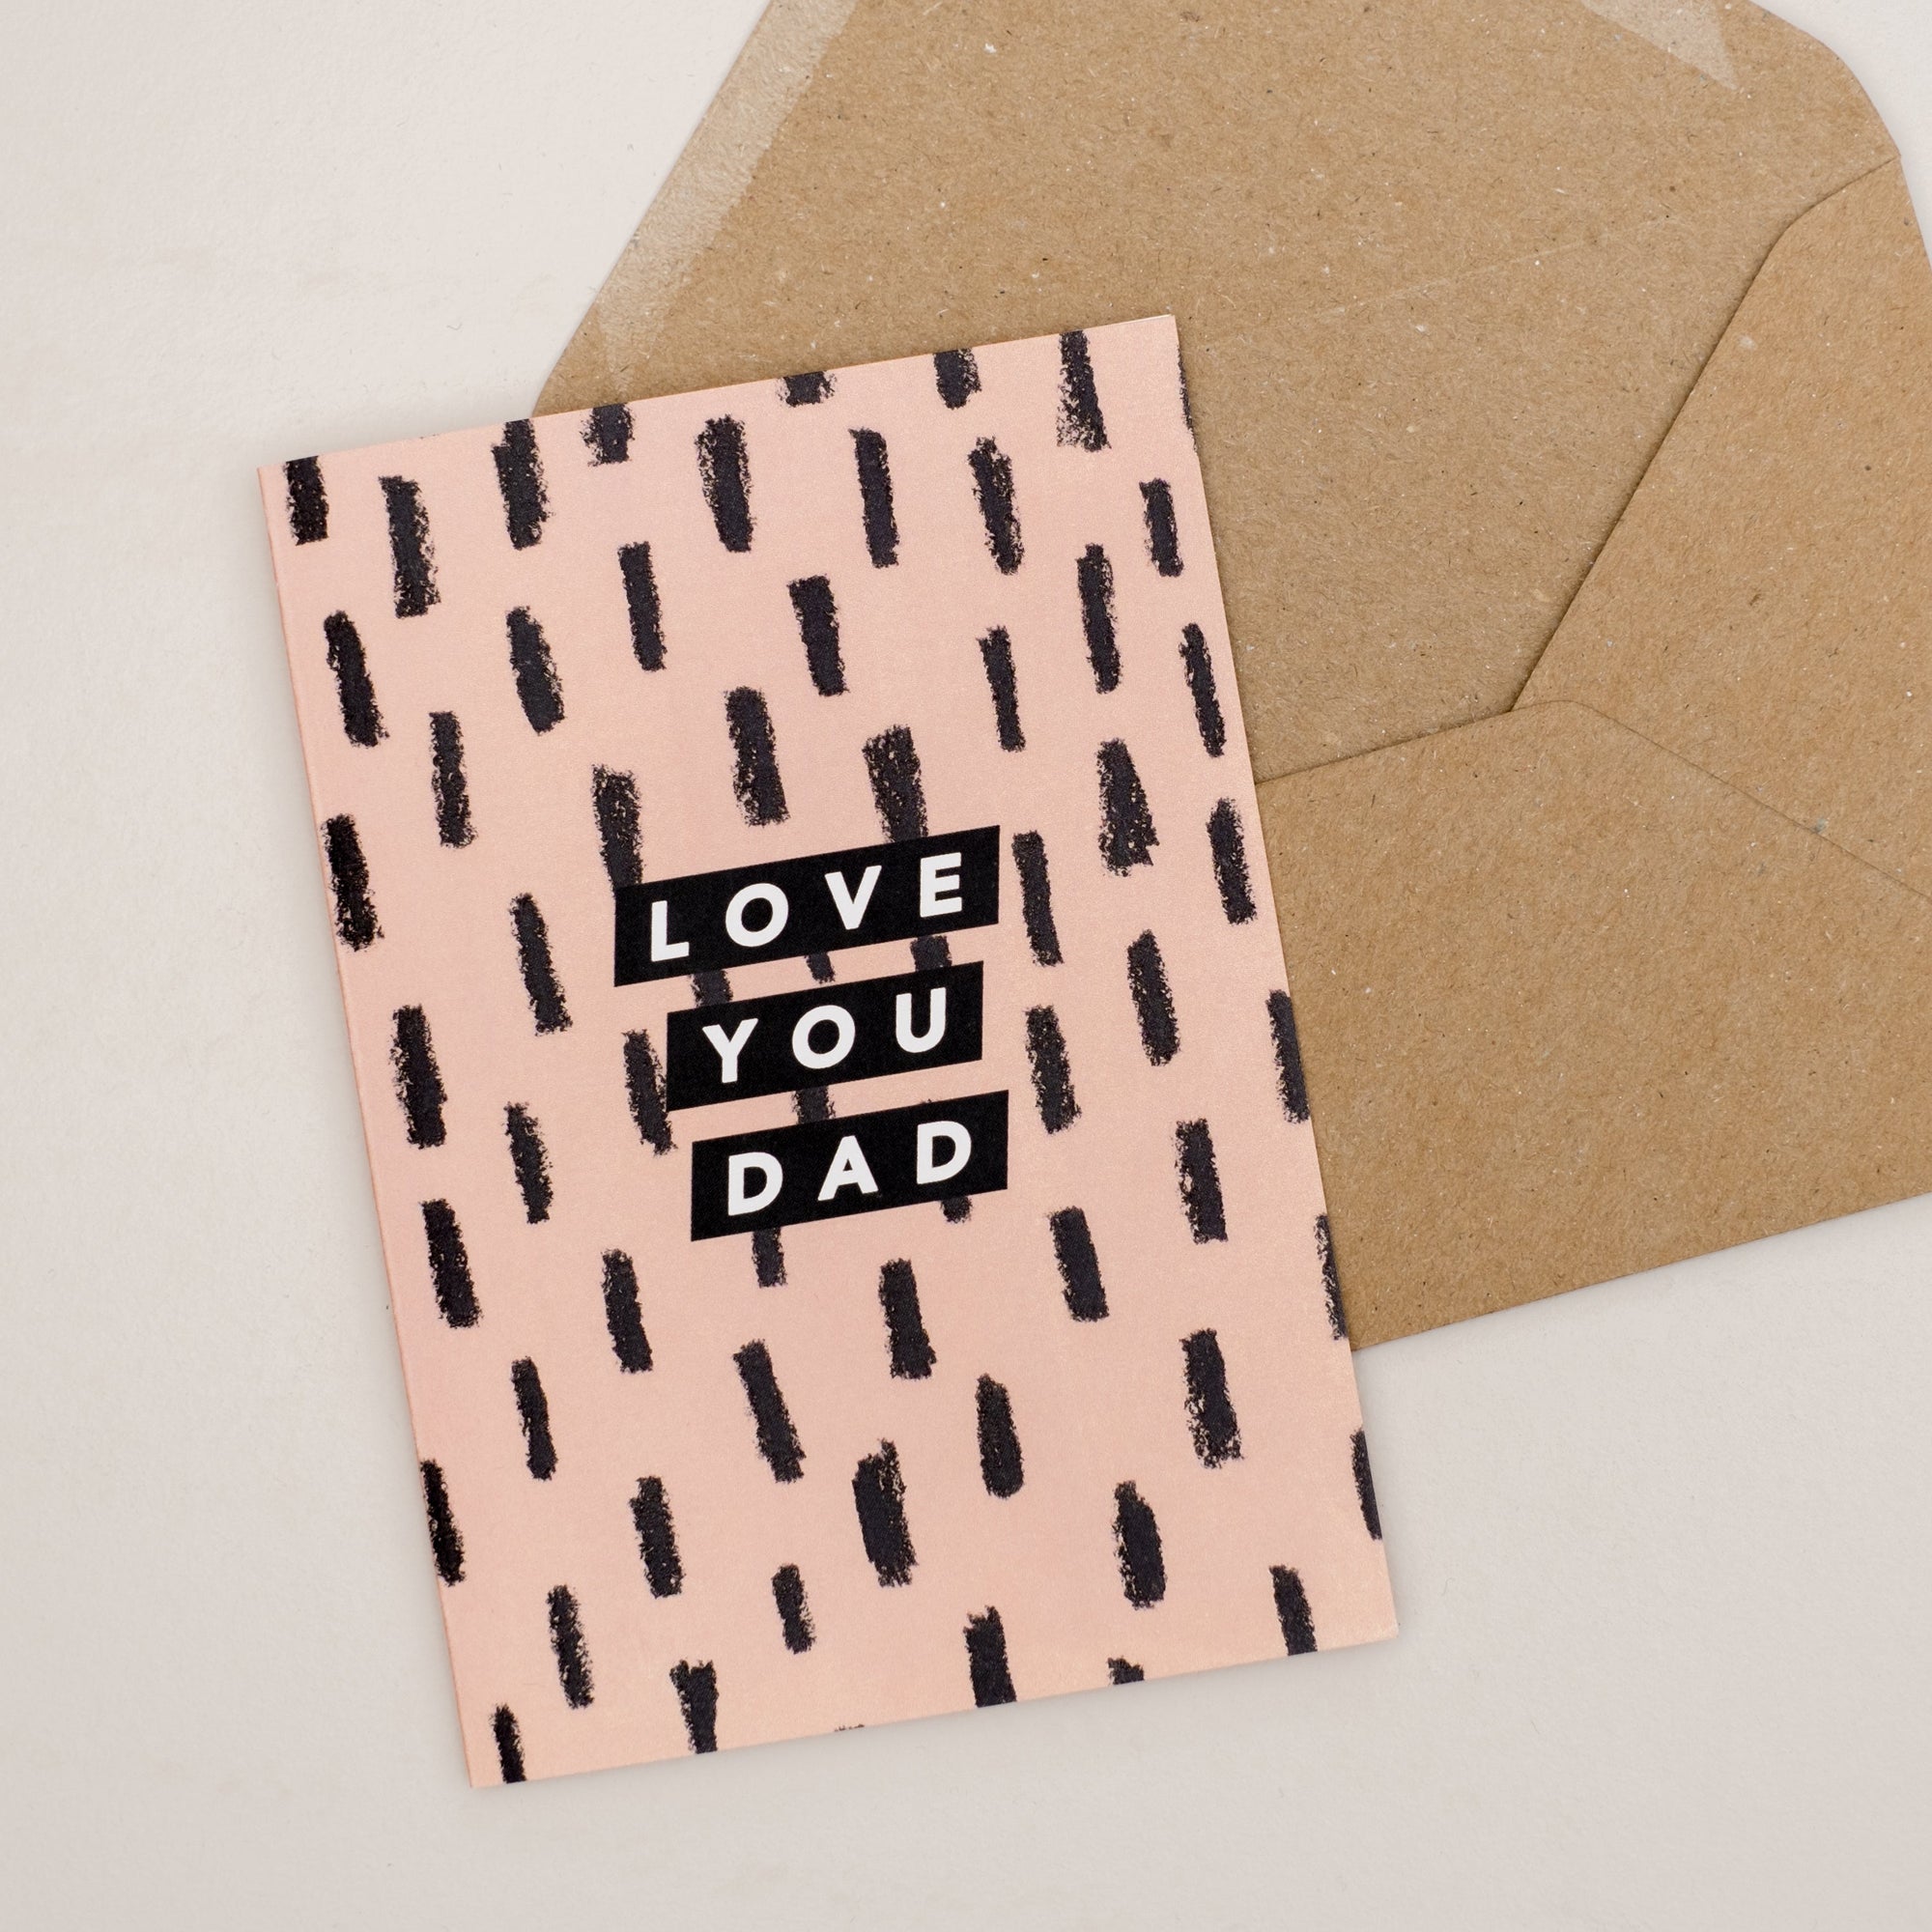 Quirky and Unusual Father's Day Cards and Gifts from Penny Black